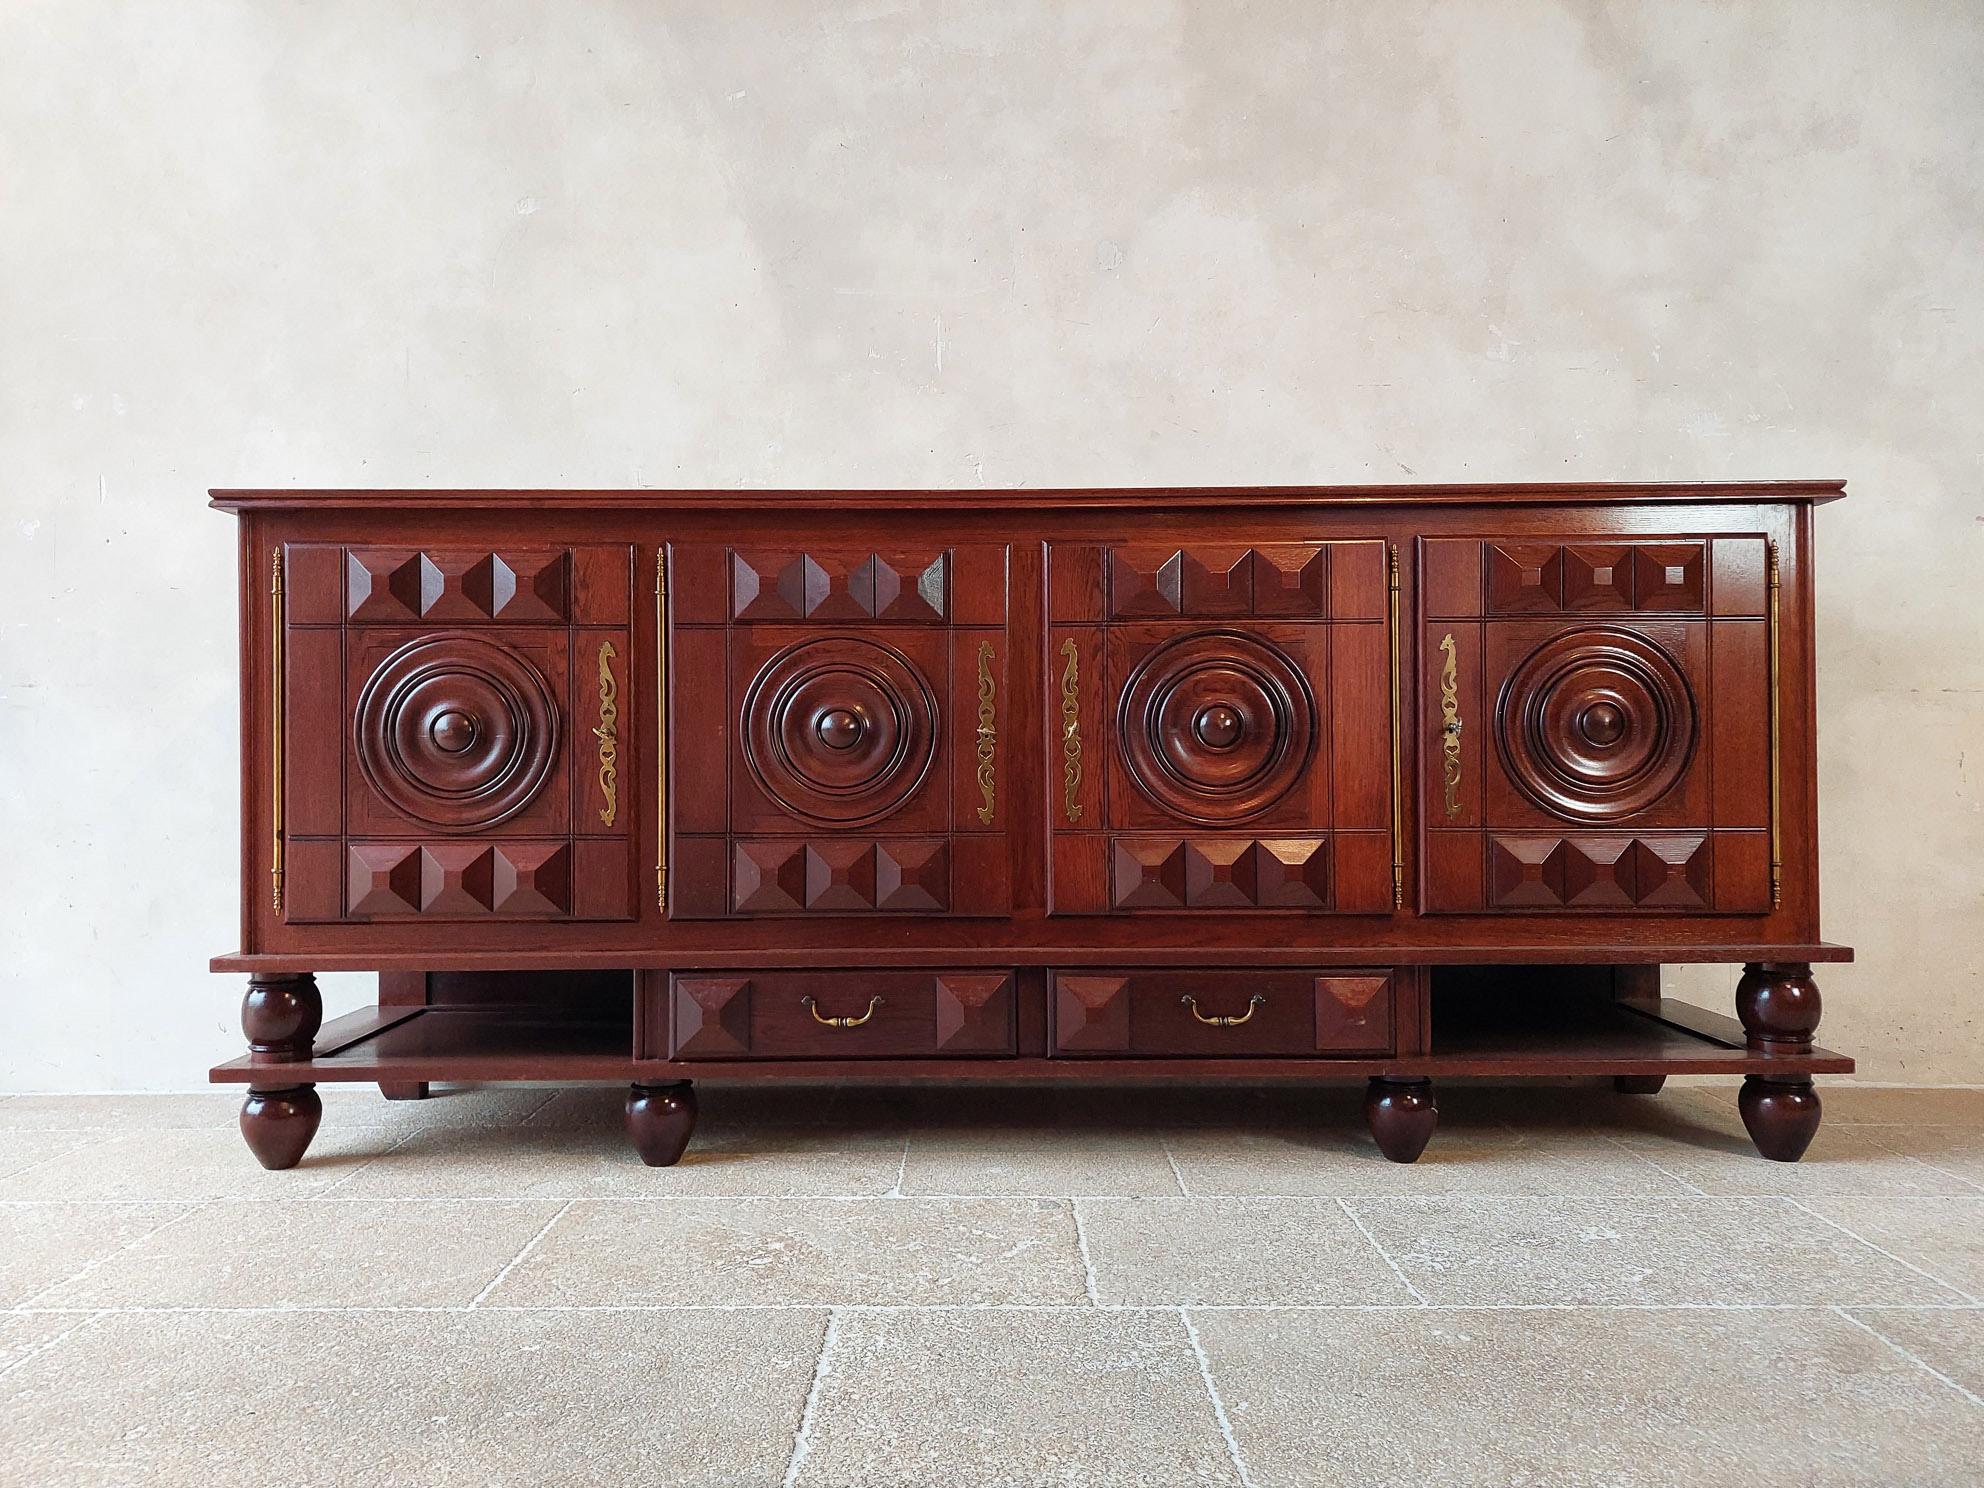 Beautiful large sideboard by Charles Dudouyt in Dark brown Walnut with a polished finish. Made in the 1940s. Four doors and two drawers with the typical geometrical shapes by Dudouyt. Style: Art Deco, early brutalist.

Dimensions: H 101 x W 240 x